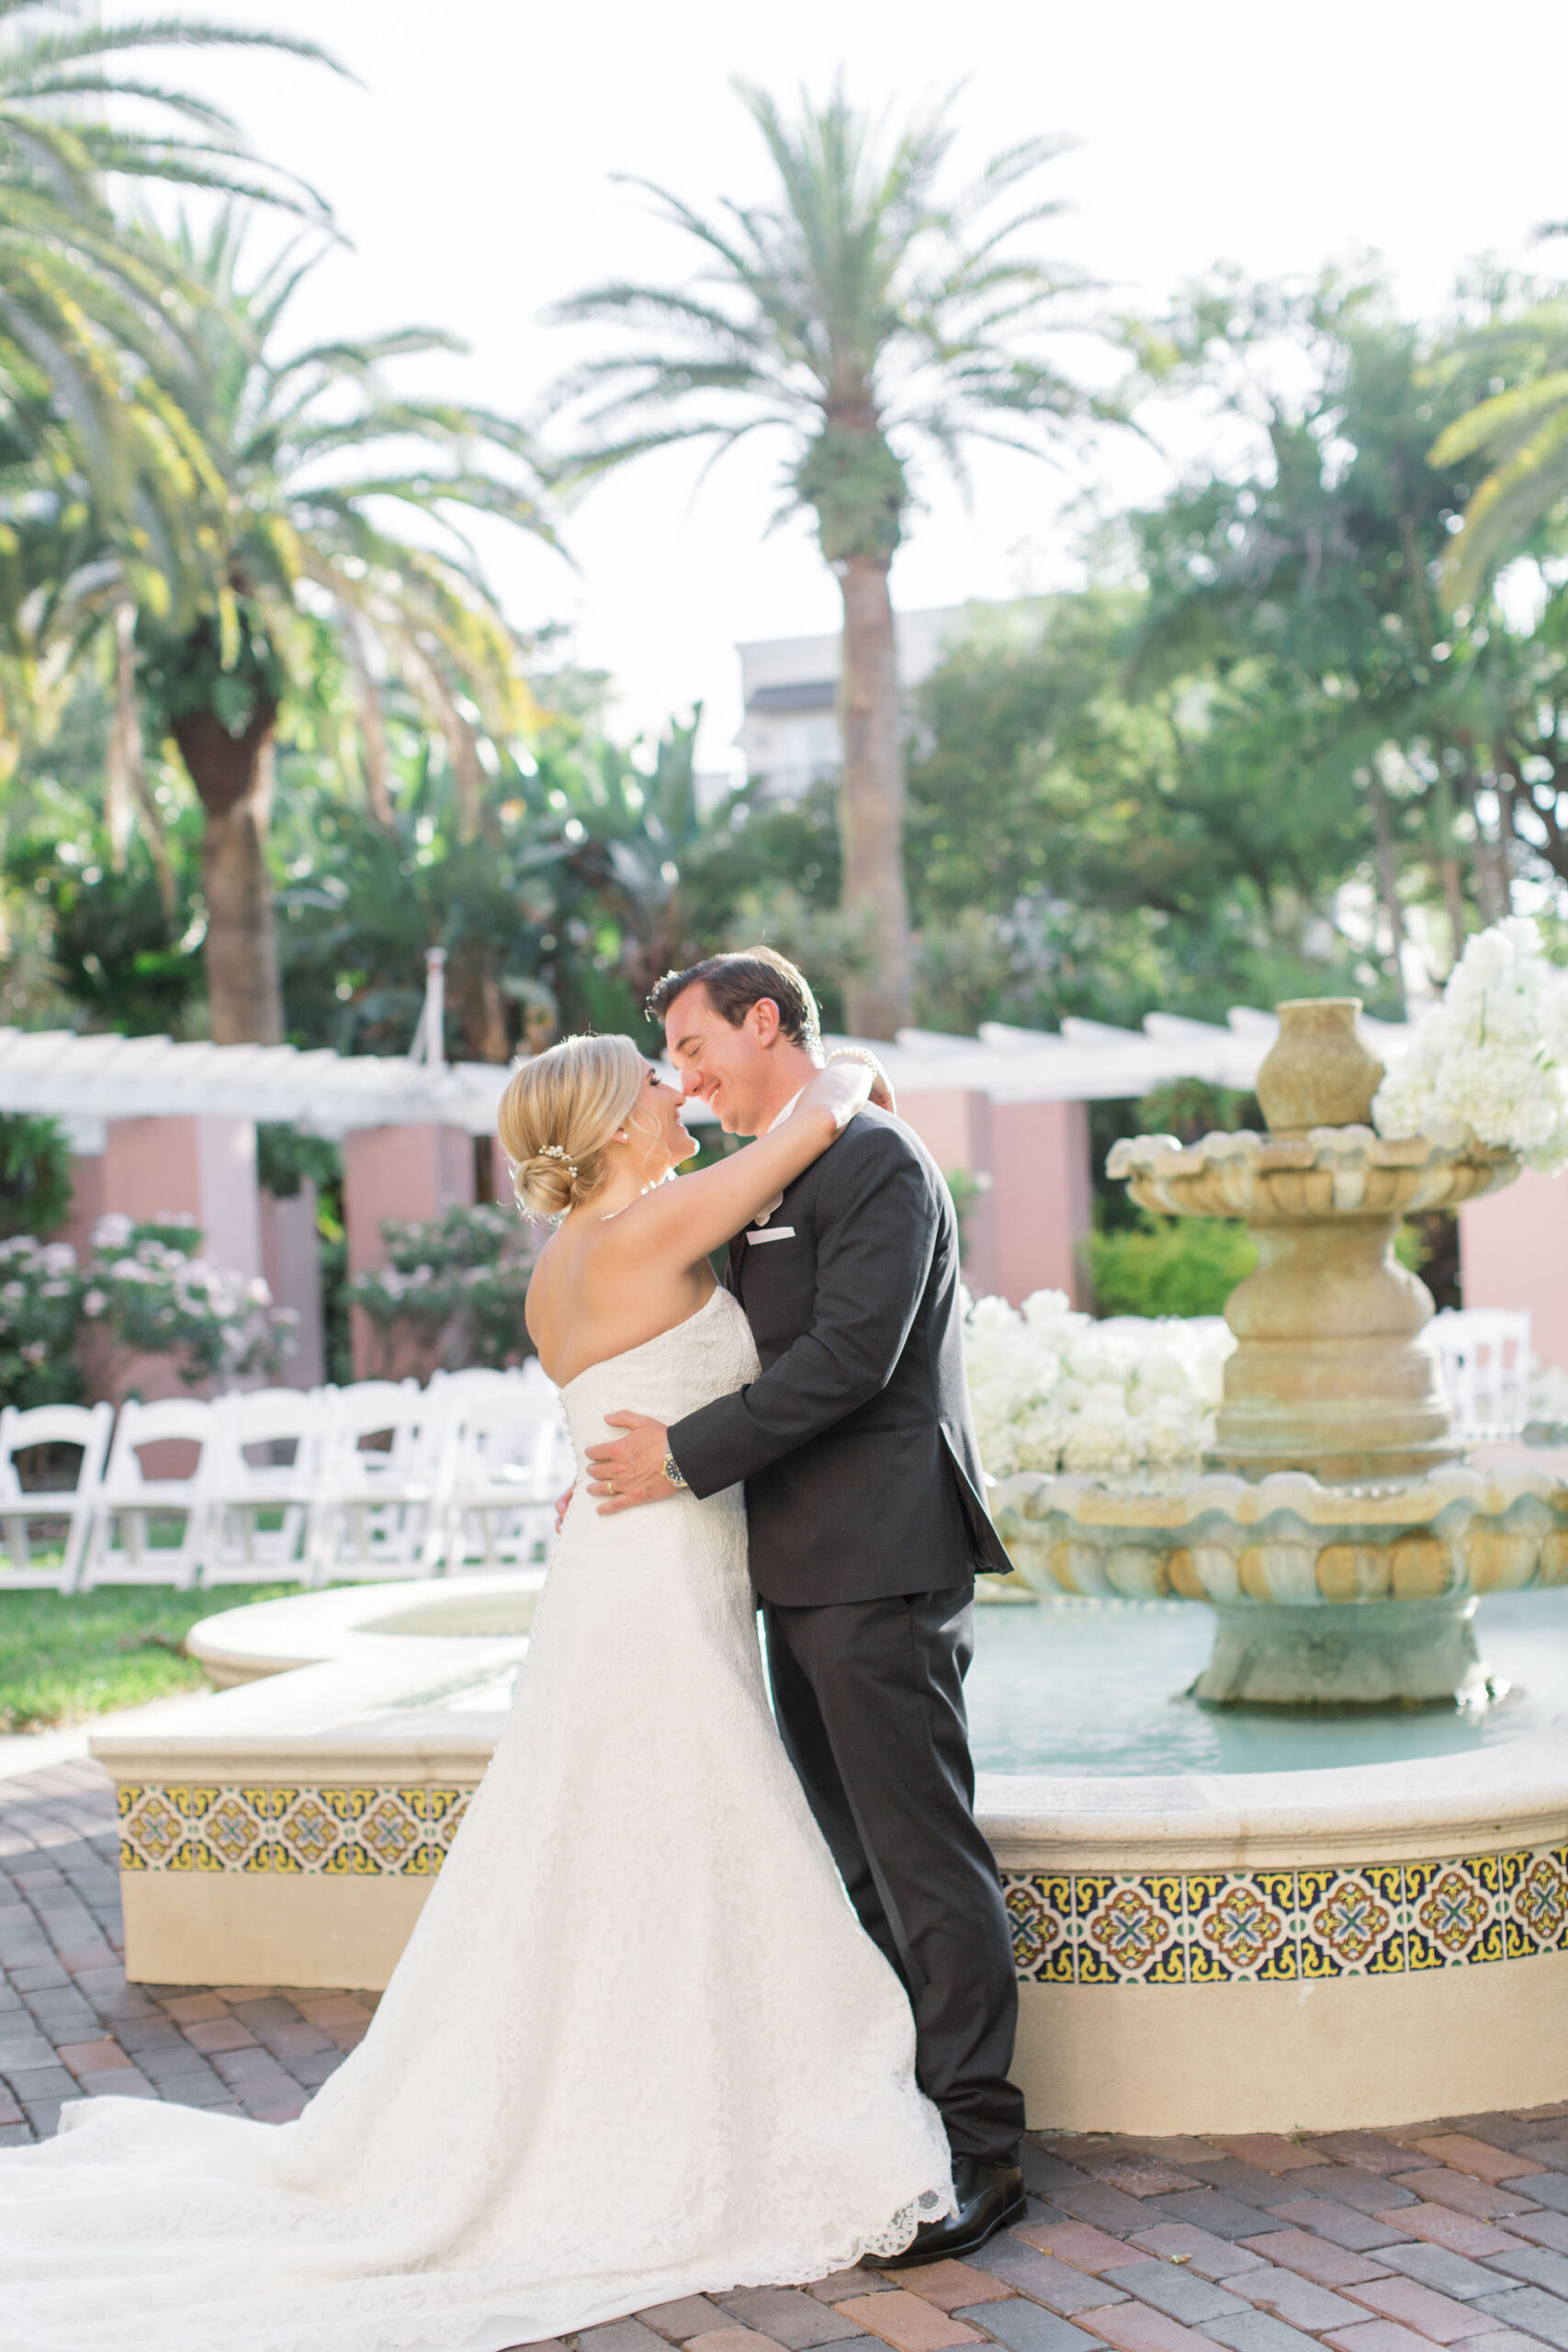 Classic Timeless Bride and Groom Wedding Portrait in Courtyard of St. Pete Wedding Venue The Vinoy Renaissance